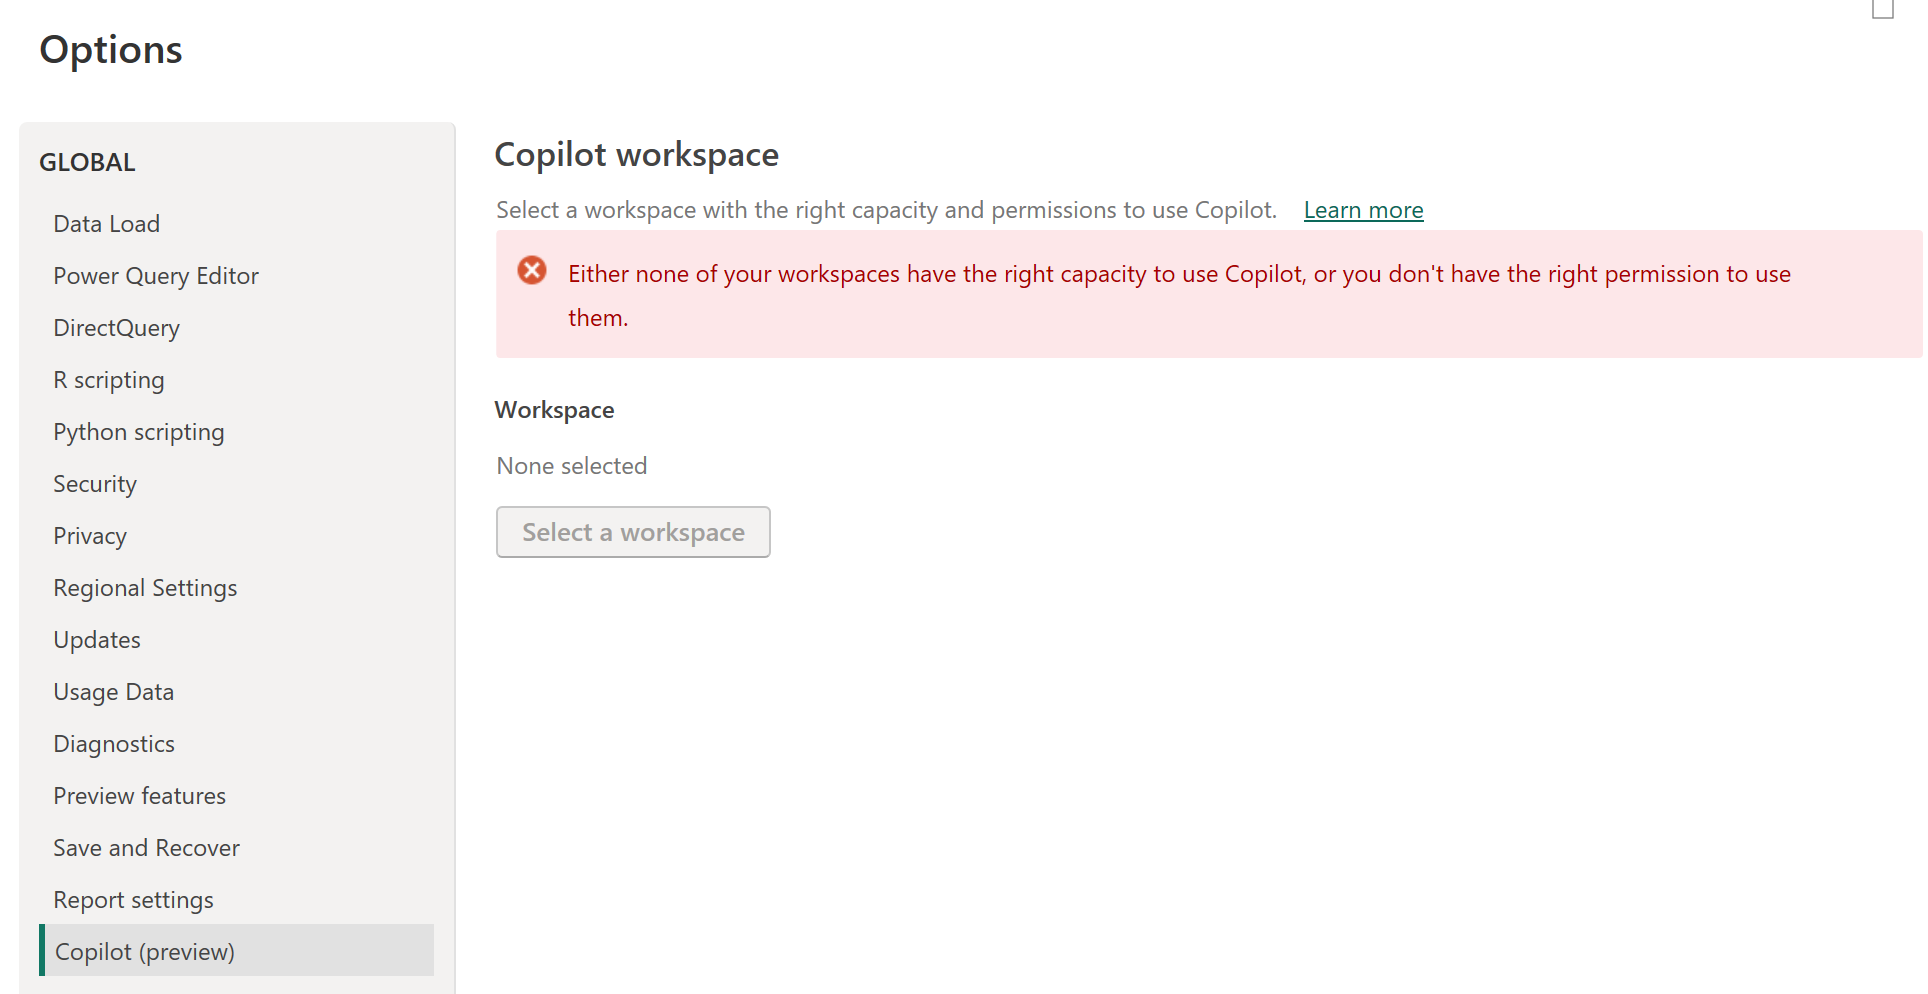 Screenshot of the Copilot settings with the error message: Either none of your workspaces have the right capacity to use Copilot, or you don't have the right permission to use them.